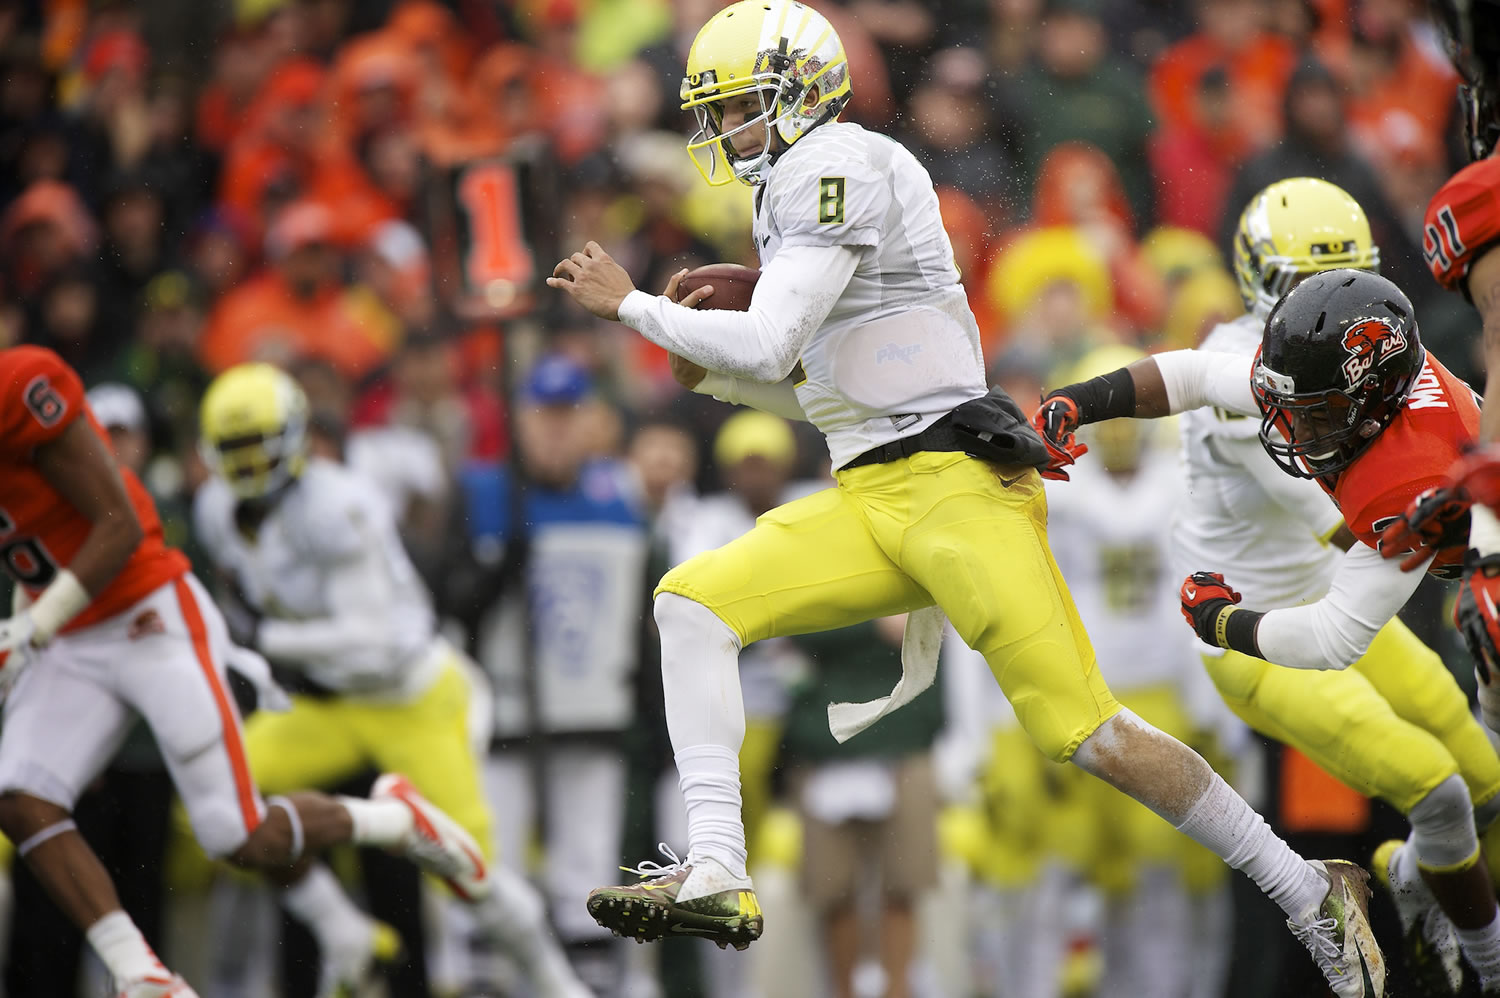 Oregon's Marcus Mariota picks up a first down Oregon State on Saturday at Reser Stadium in Corvallis.